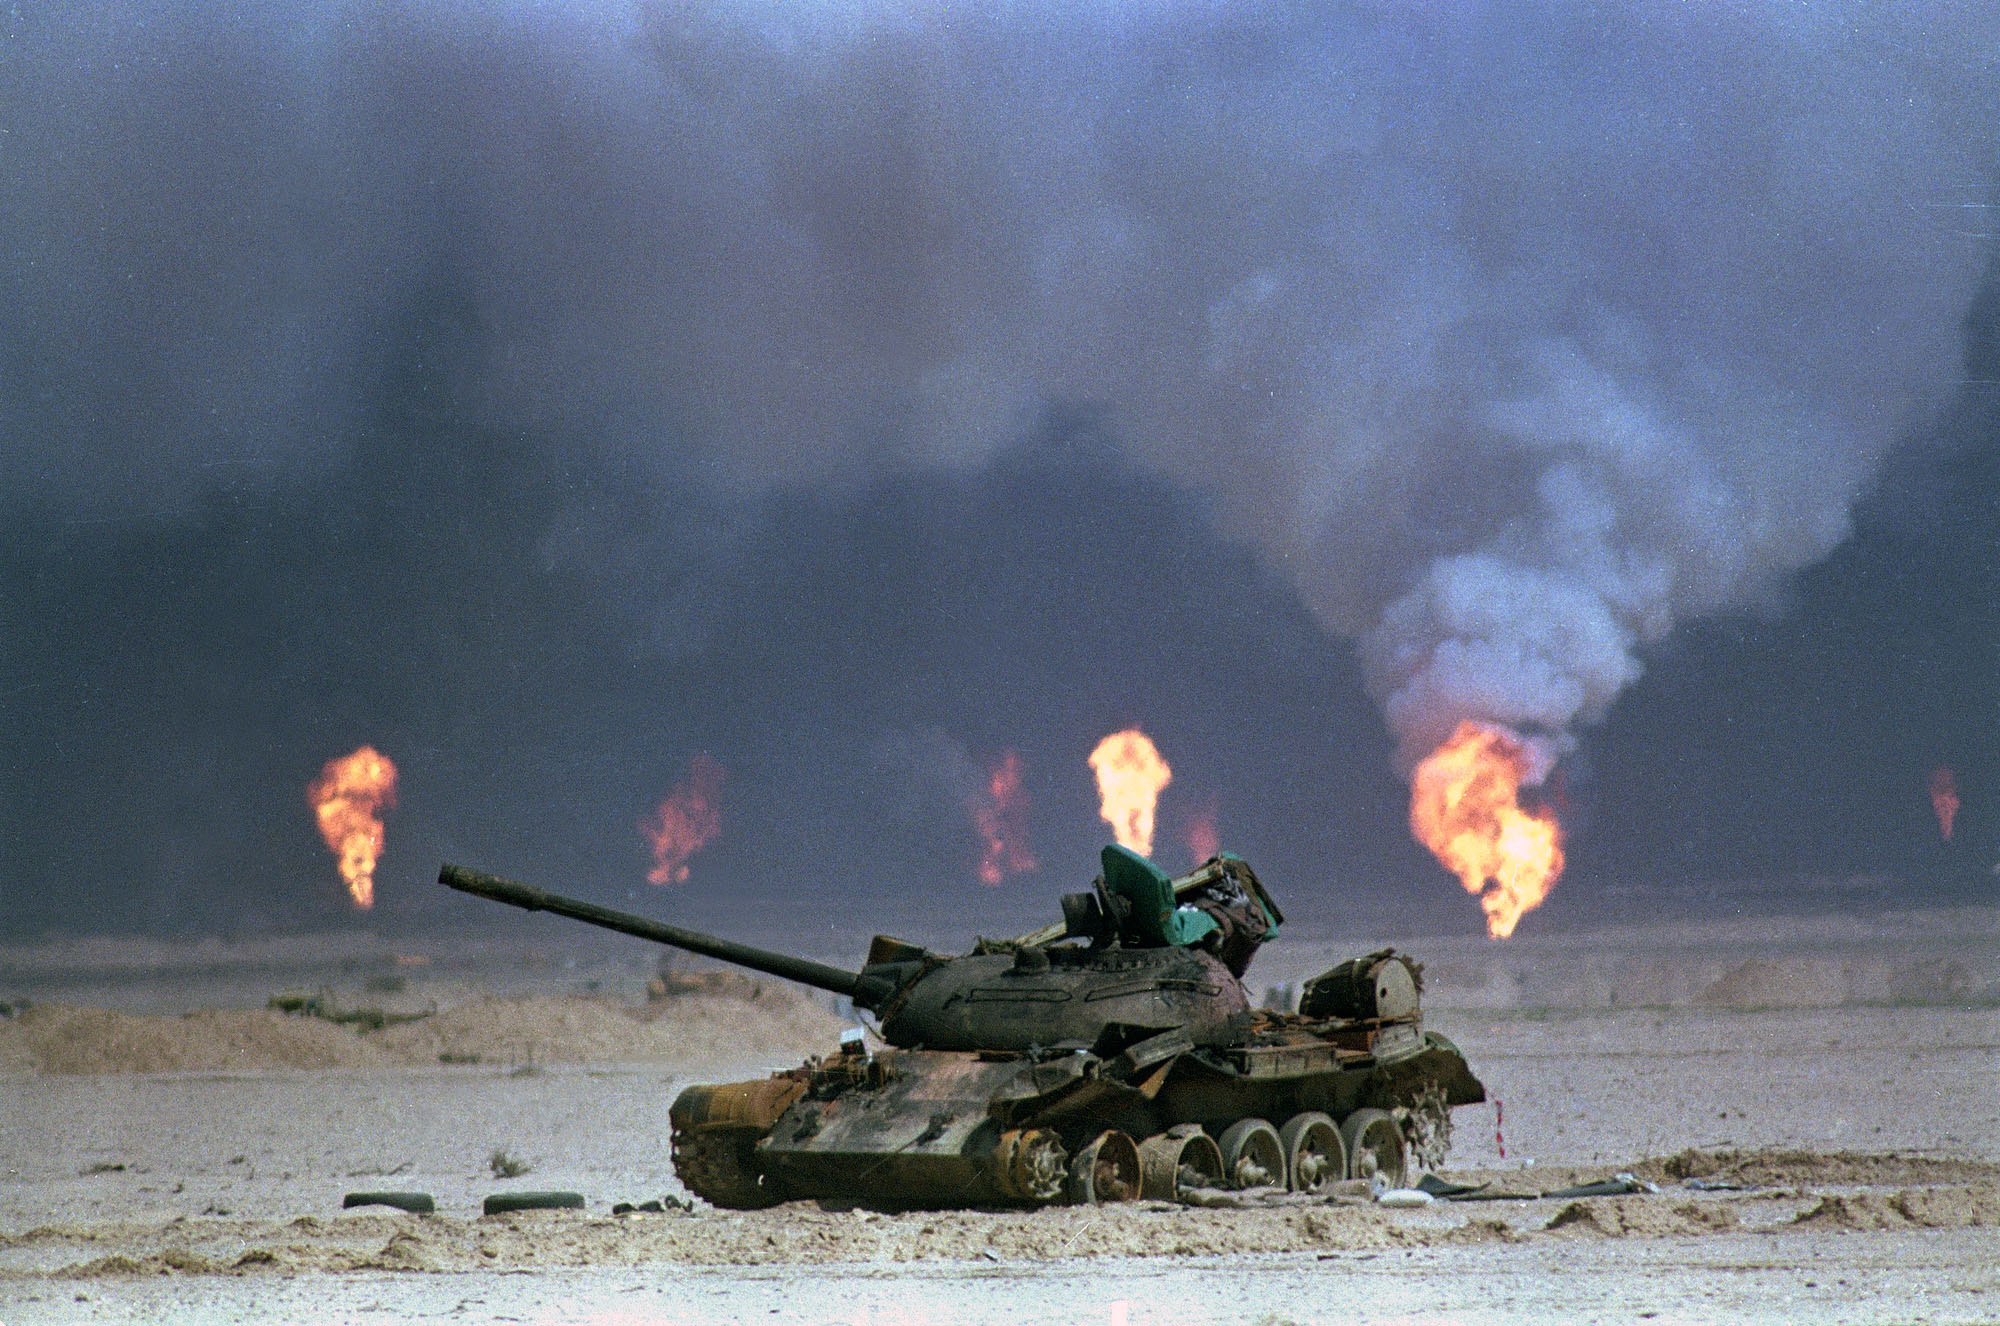 Operation Desert Storm: 25 Years Since the First Gulf War - The Atlantic